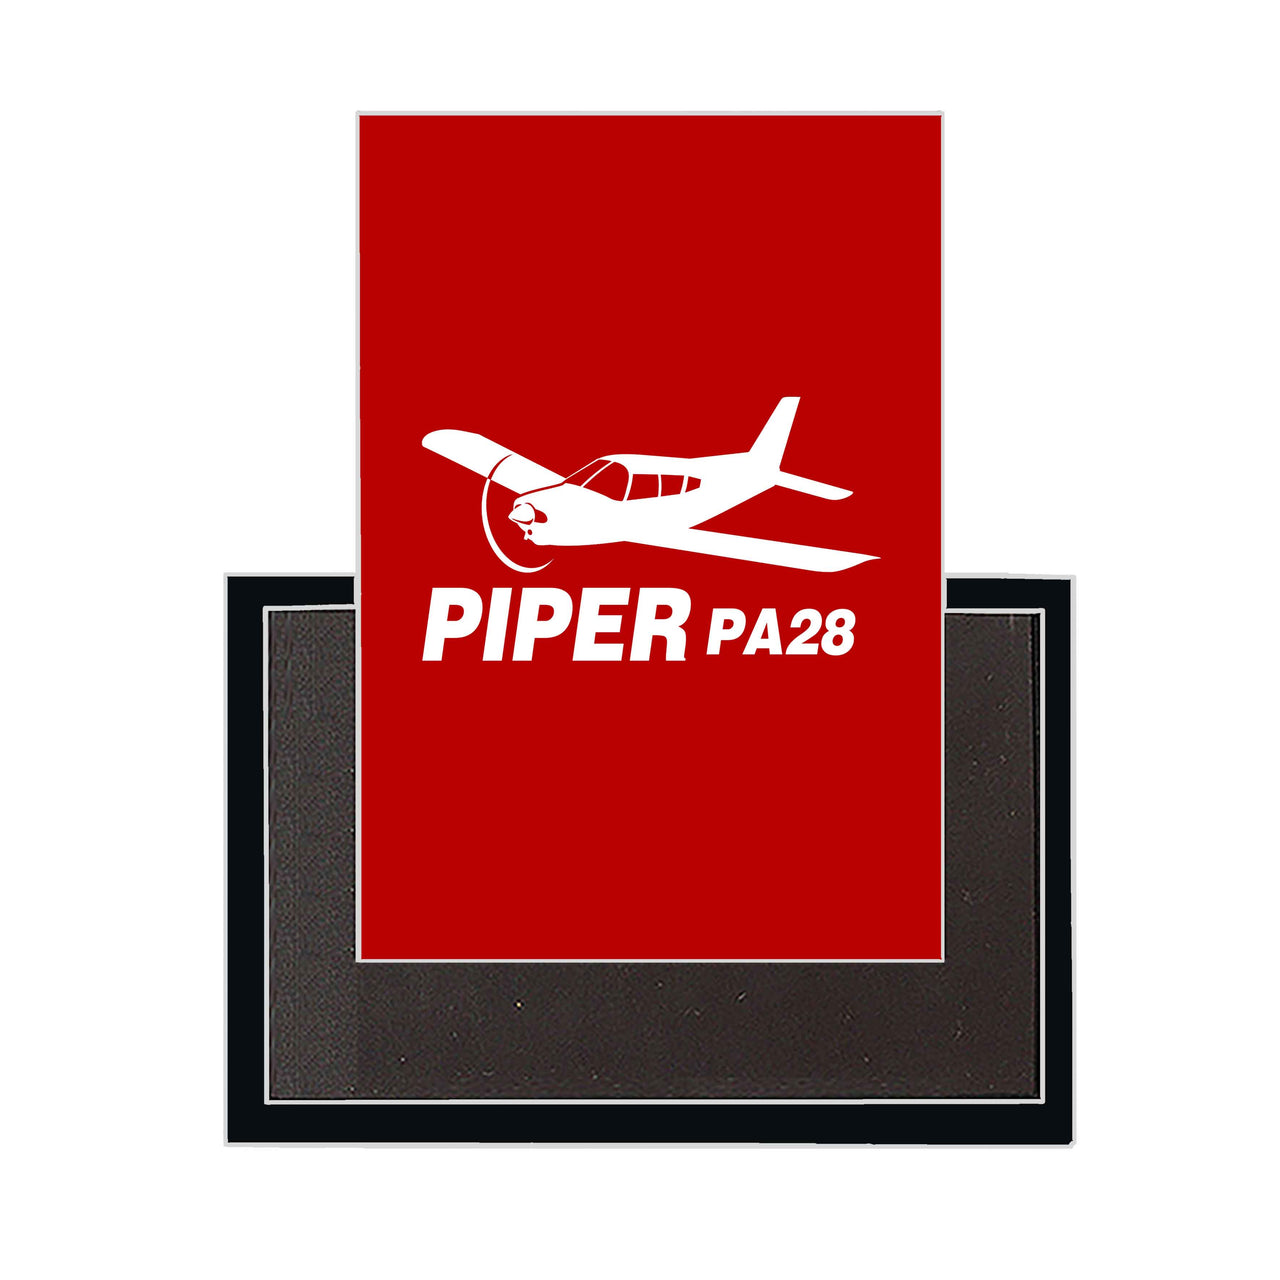 The Piper PA28 Designed Magnets